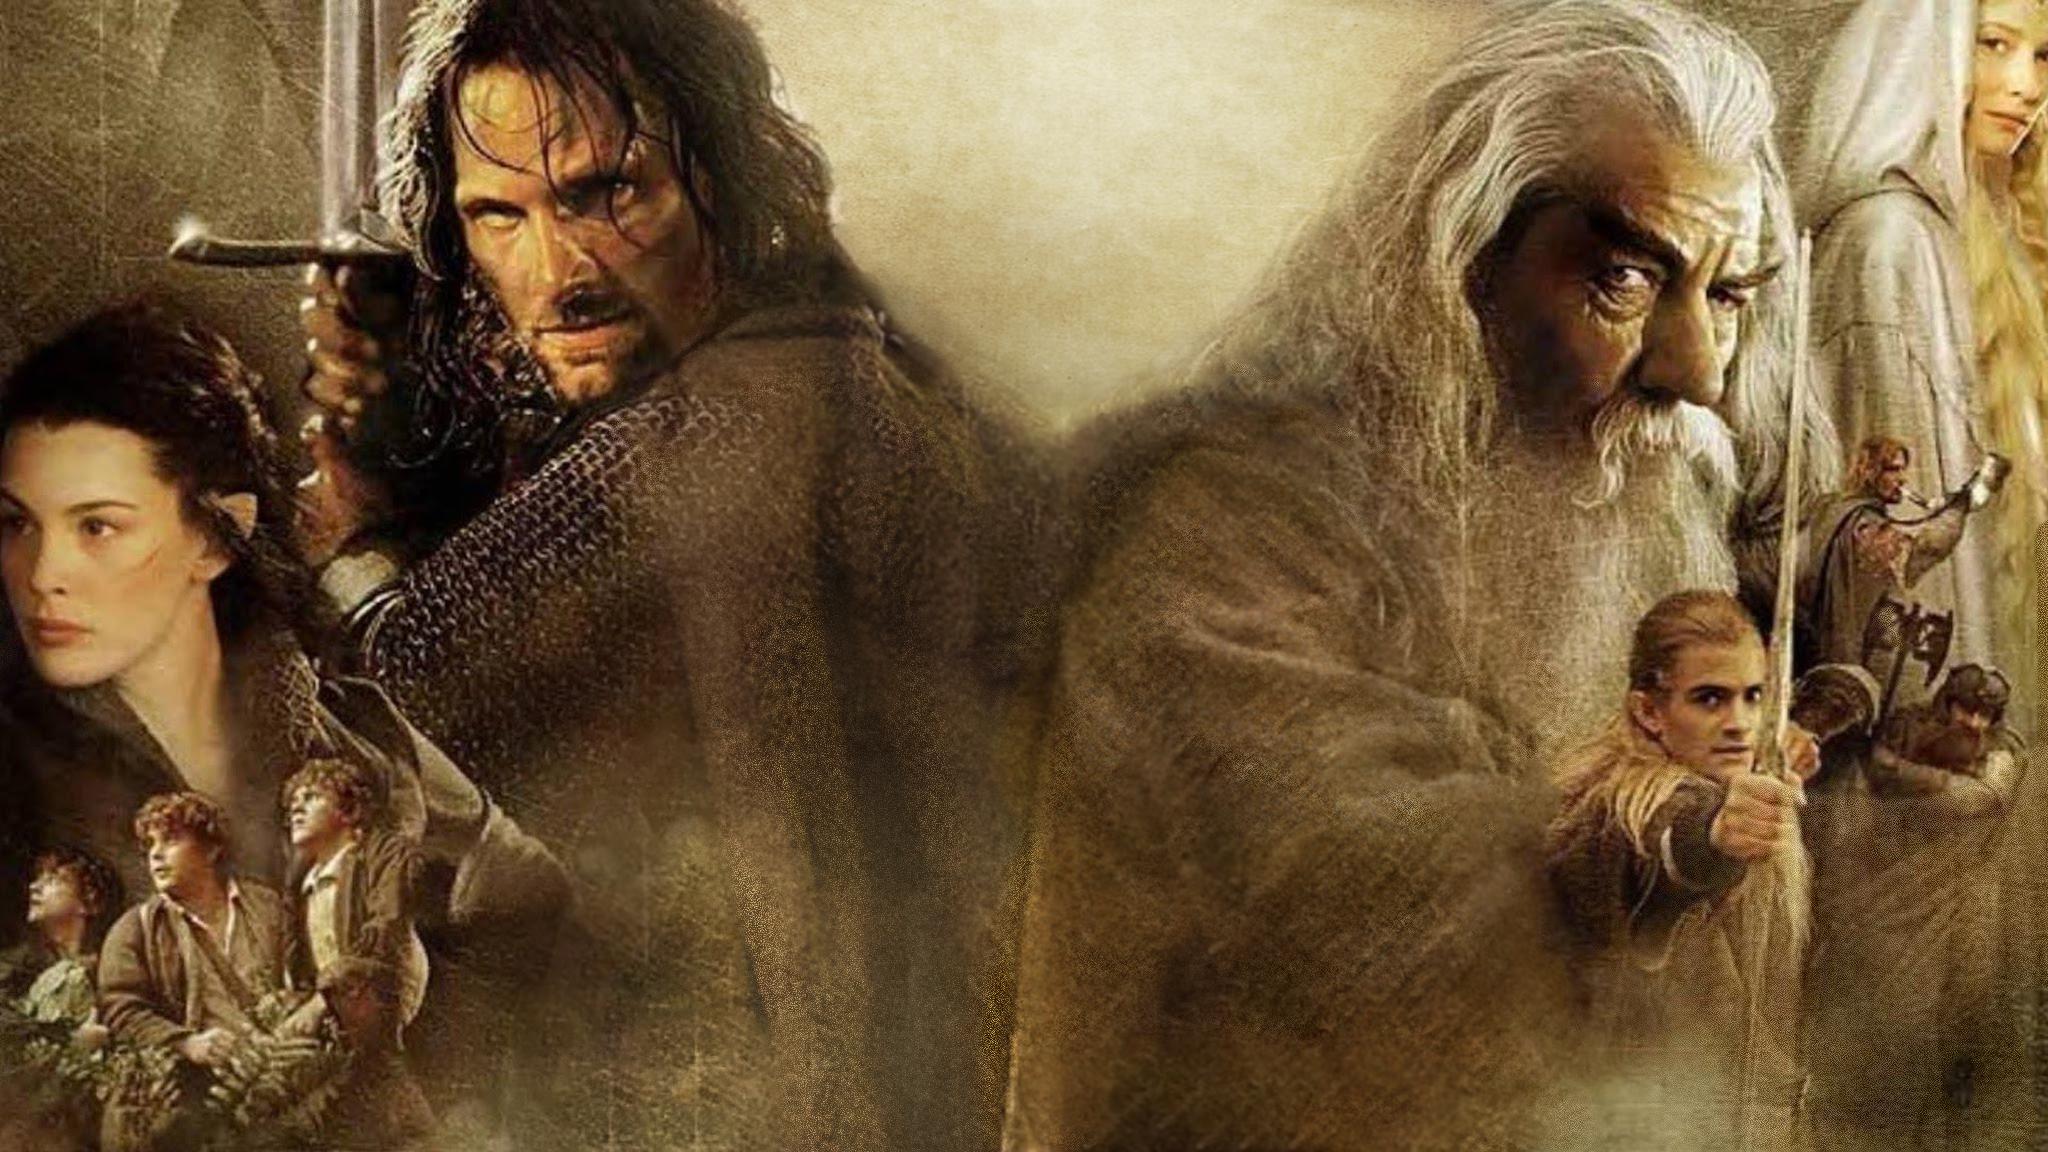 Lord of the Rings - Fellowship of the Ring